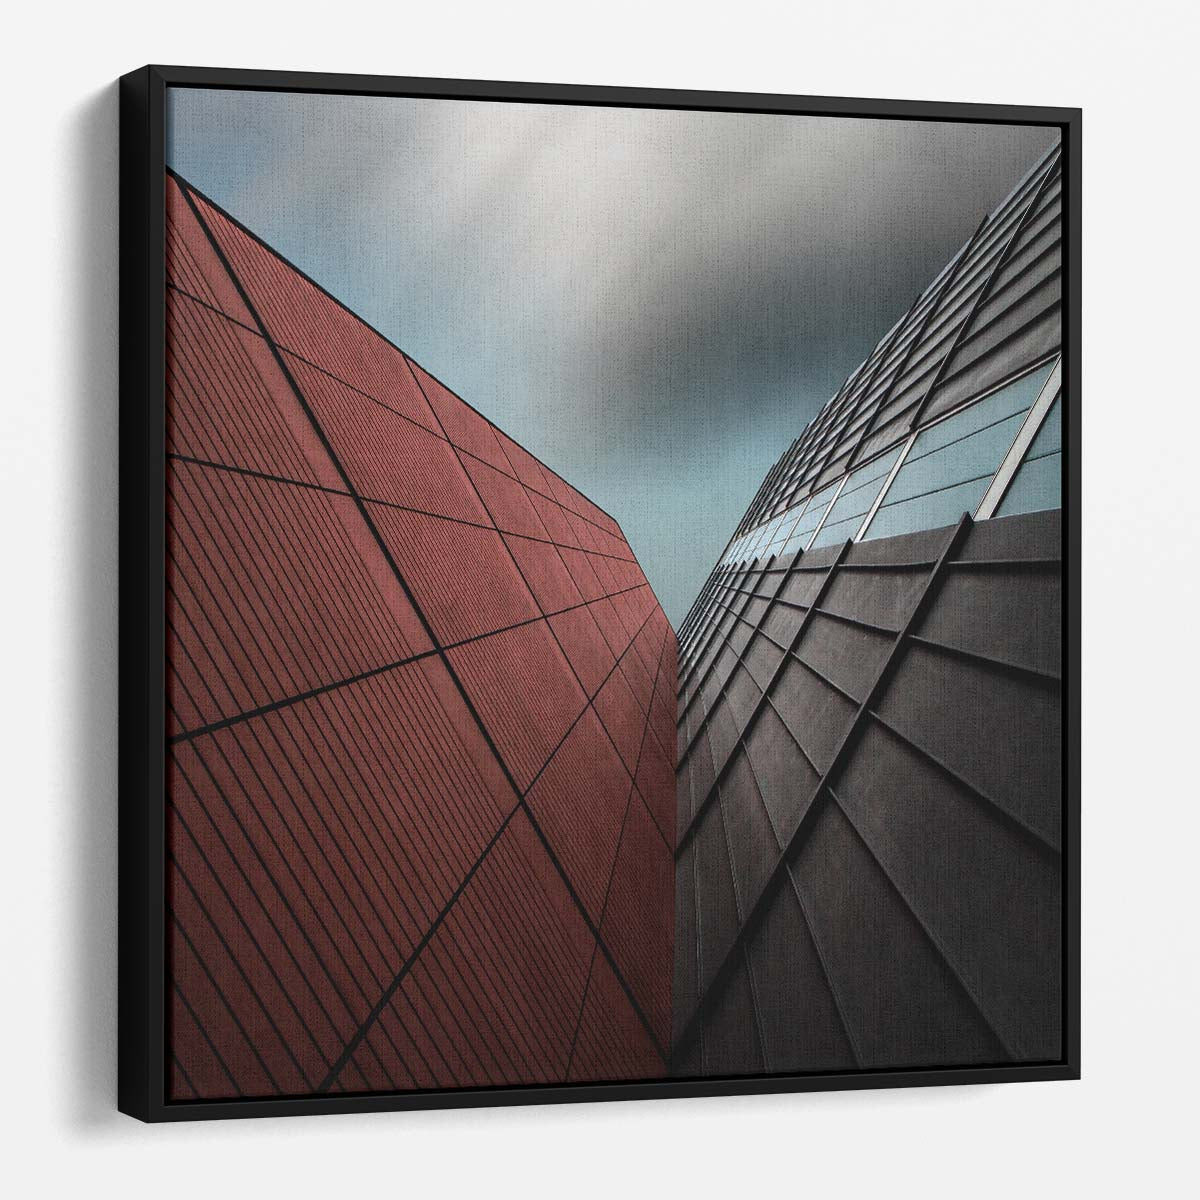 Abstract Urban Architecture High Facade Grid Photography Wall Art by Luxuriance Designs. Made in USA.